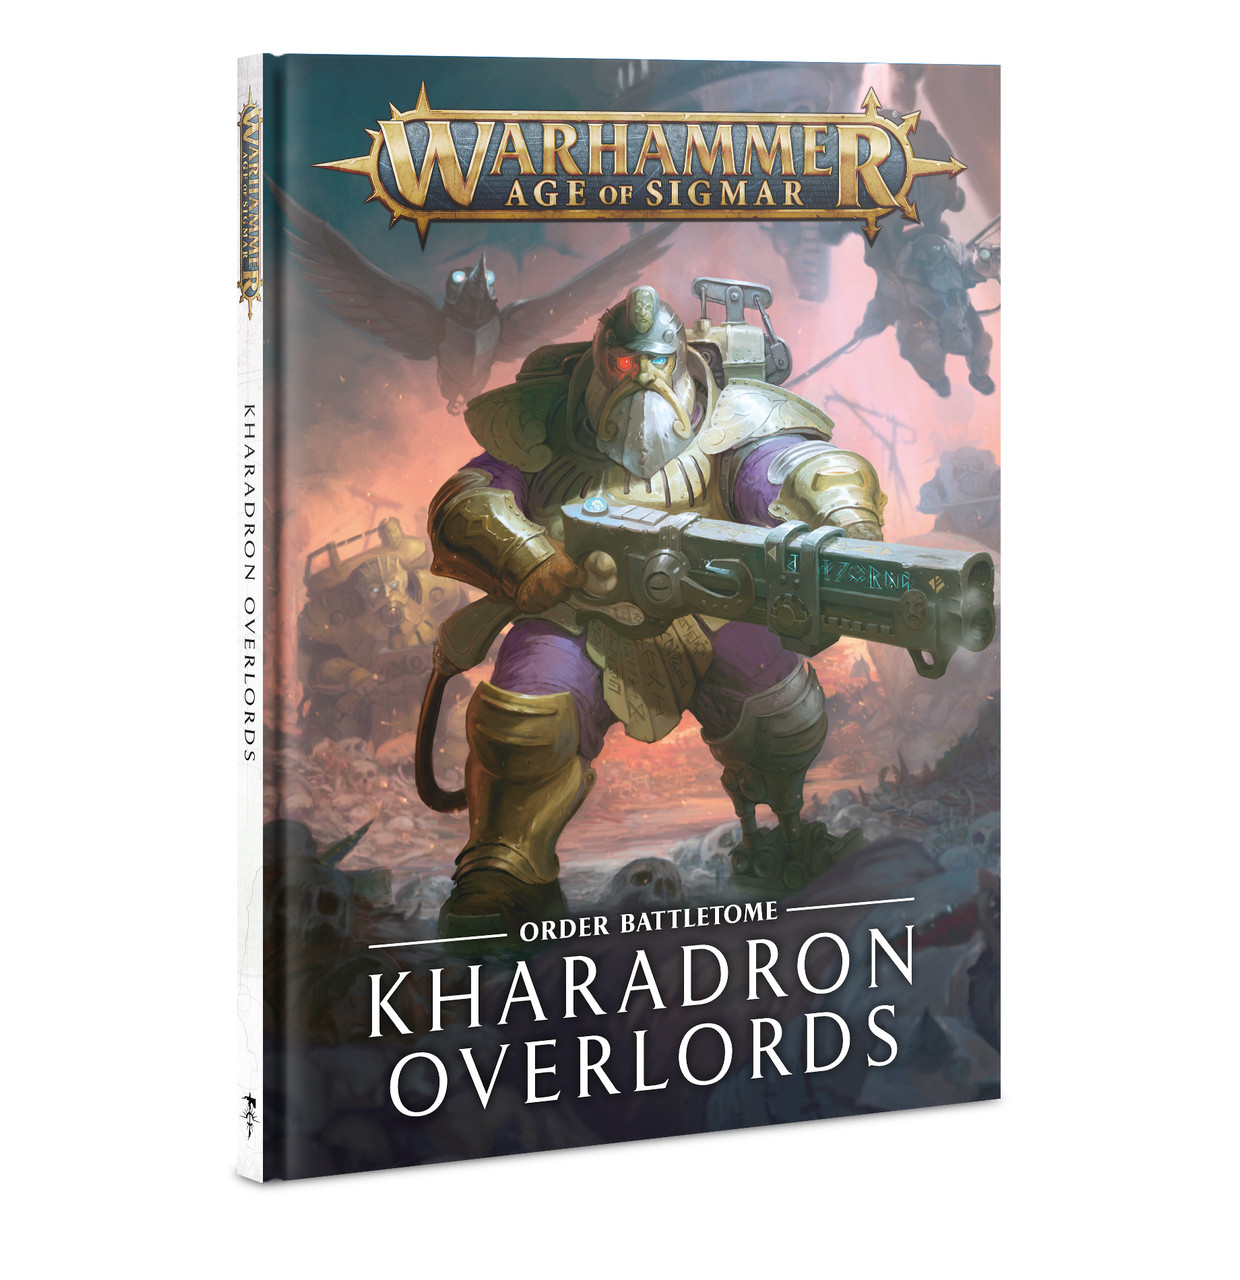 GW84-02 BATTLETOME: KHARADRON OVERLORDS